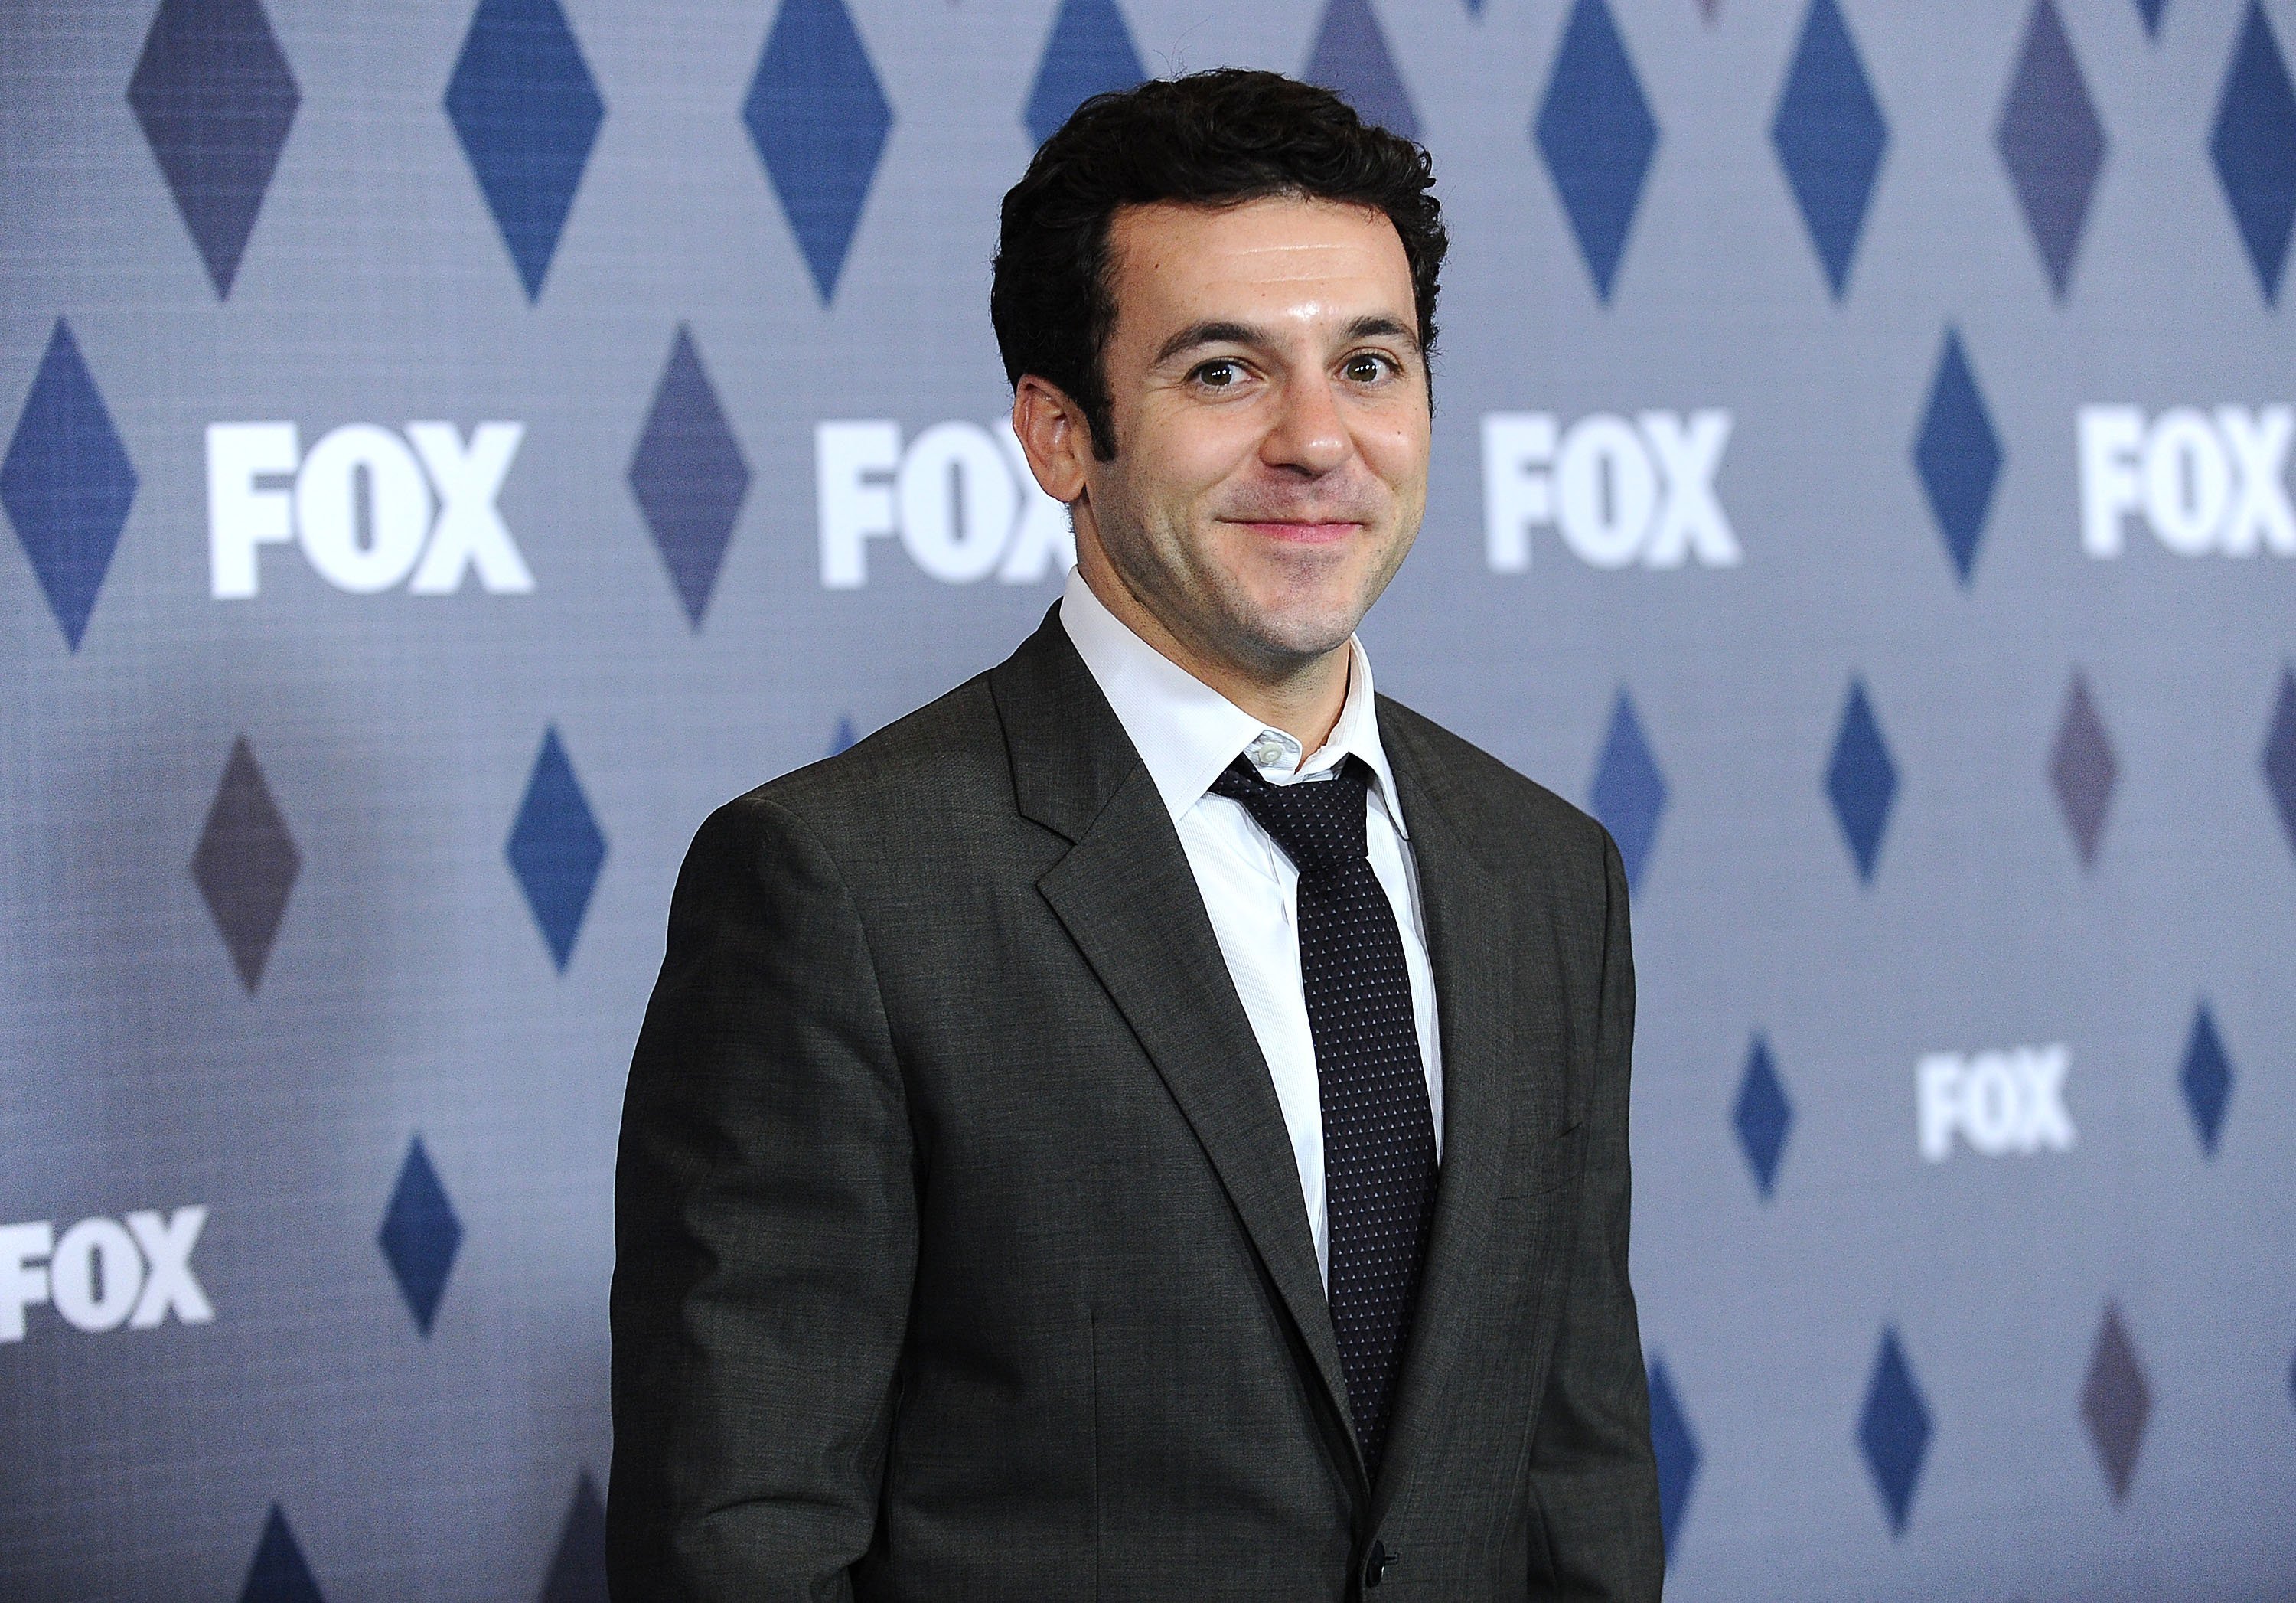 Fred Savage on January 15, 2016 in Pasadena, California | Source: Getty Images